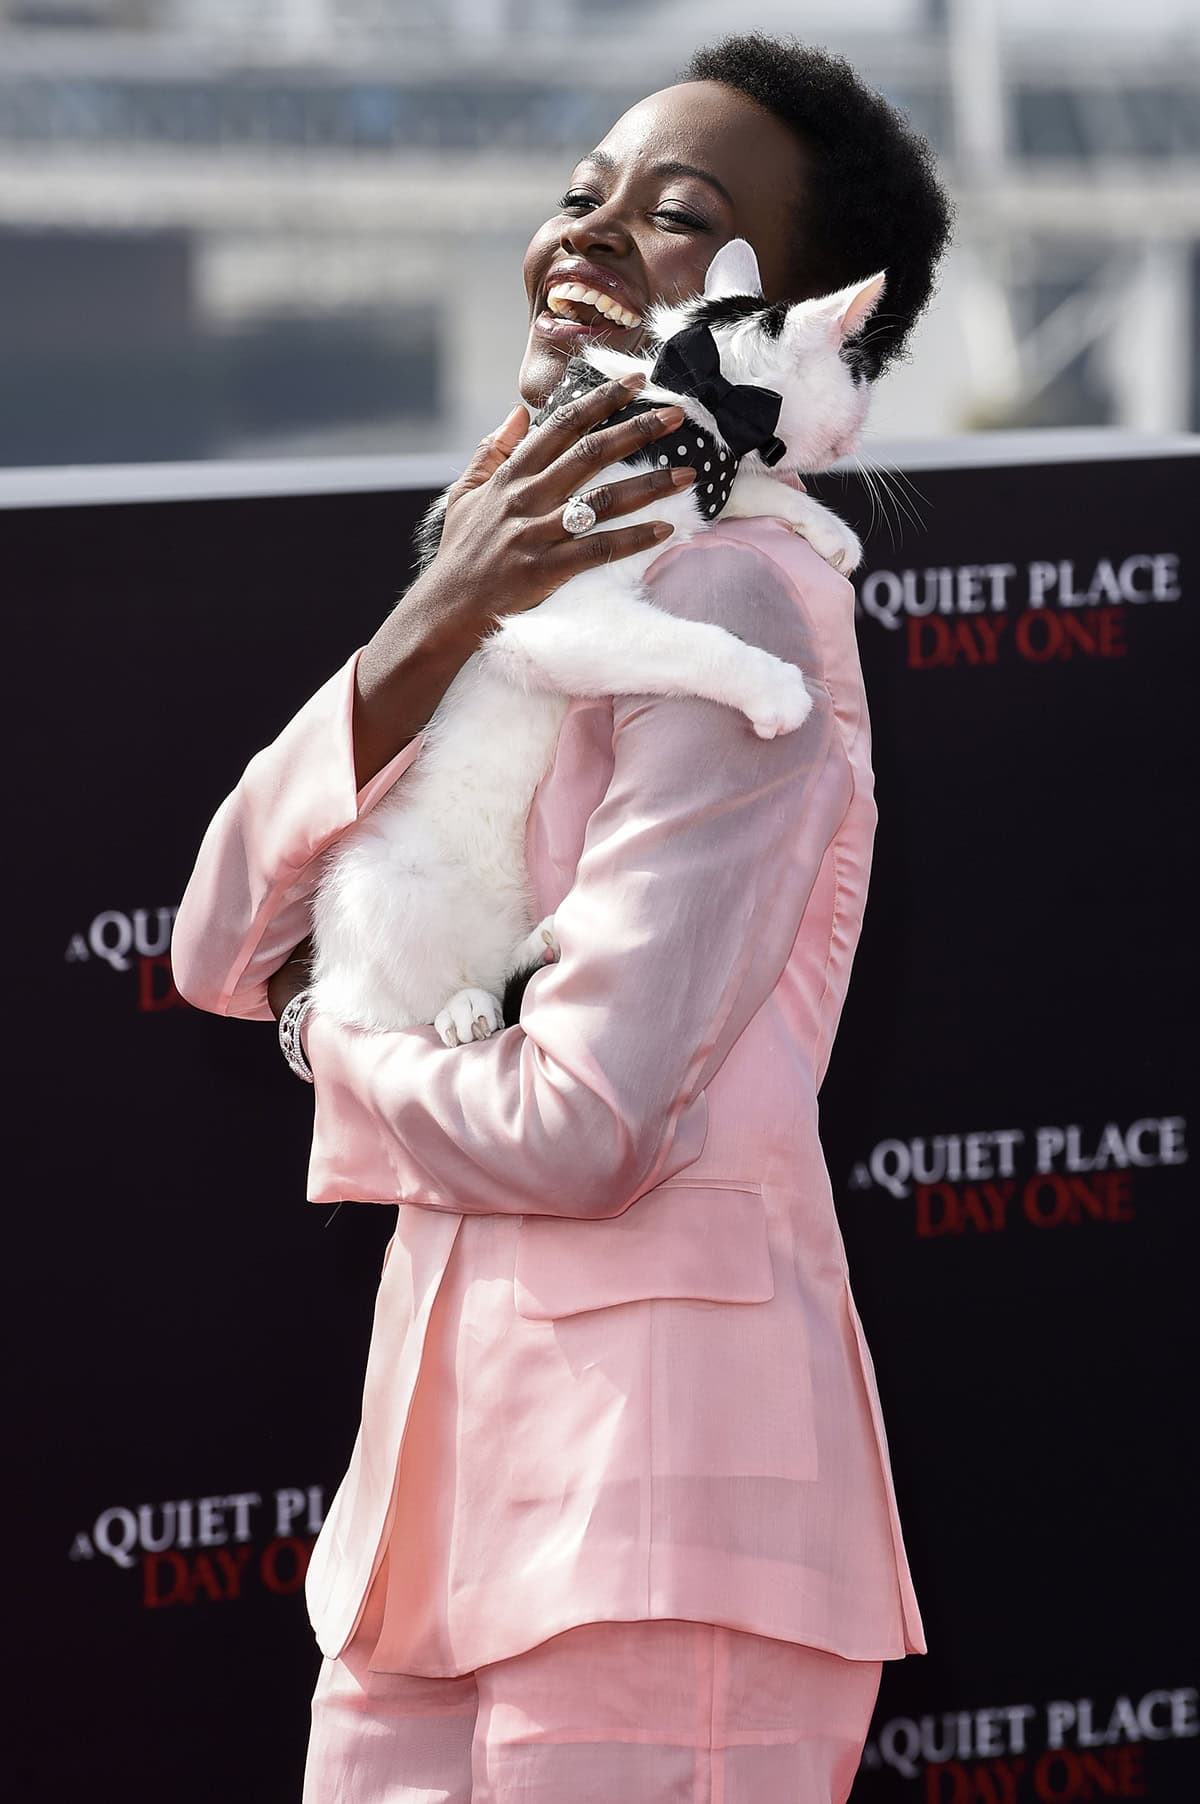 The black-and-white cat Lupita Nyong'o is carrying is her co-star Schnitzel, who plays Frodo in the apocalyptic horror film A Quiet Place: Day One